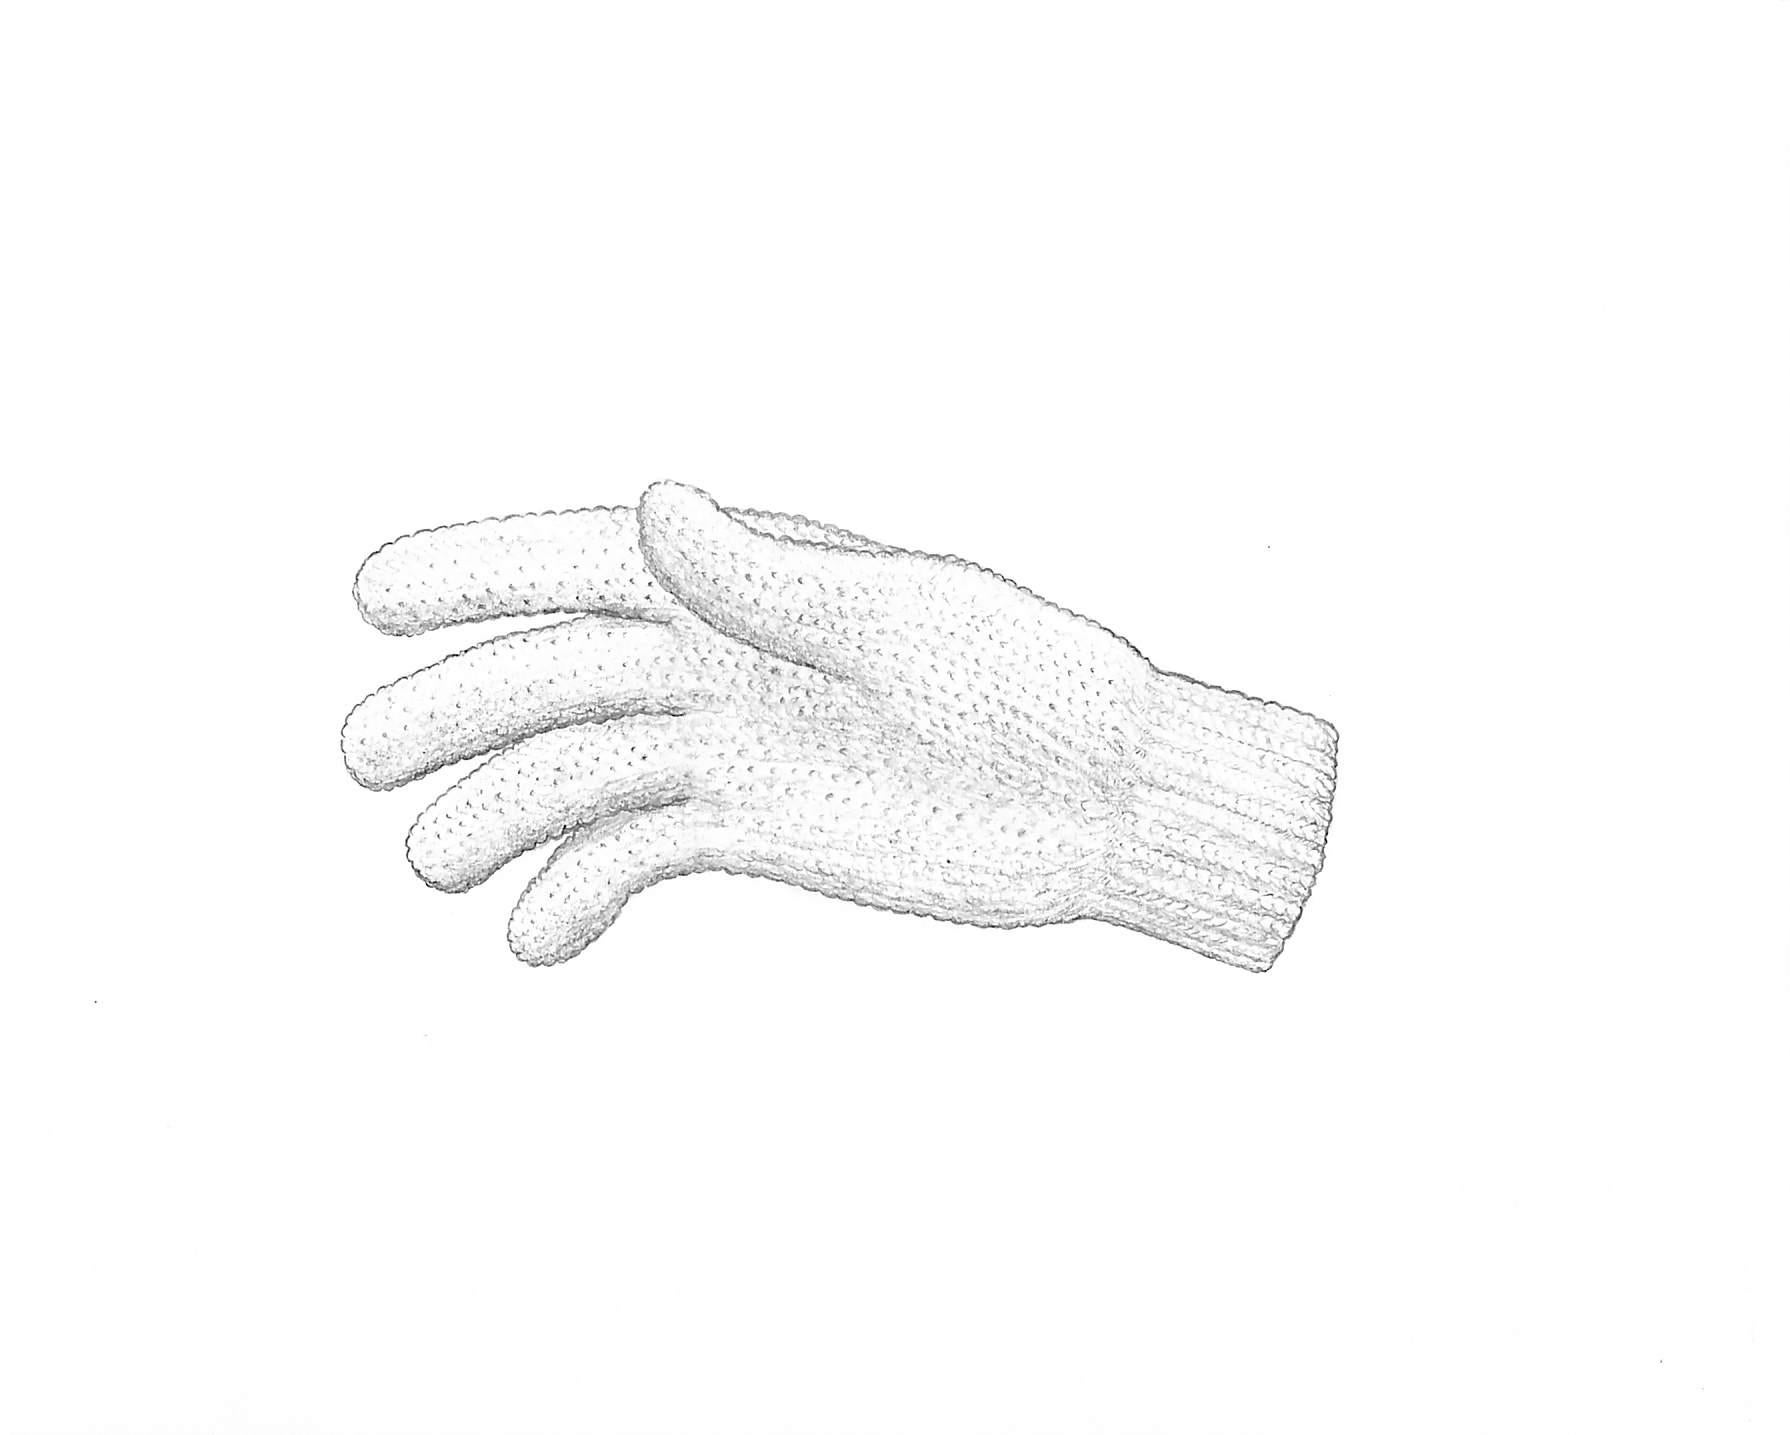 Wool Hunting Glove 2001 Graphite Drawing - Art by Unknown